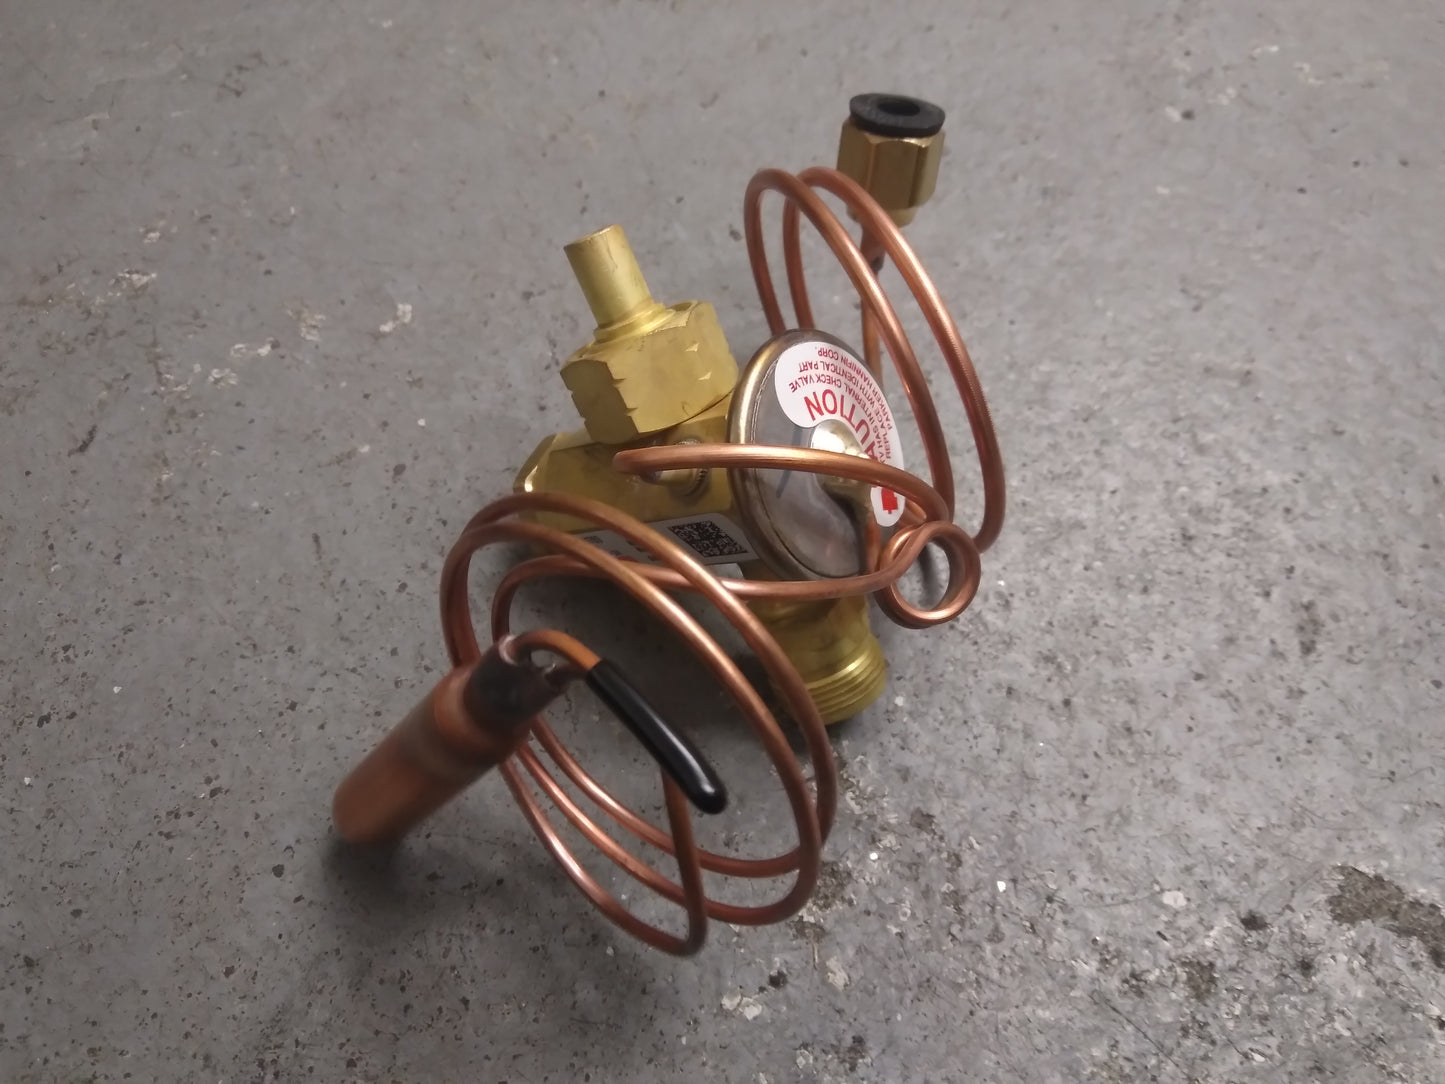 3 TON THERMOSTATIC EXPANSION VALVE, R-410A